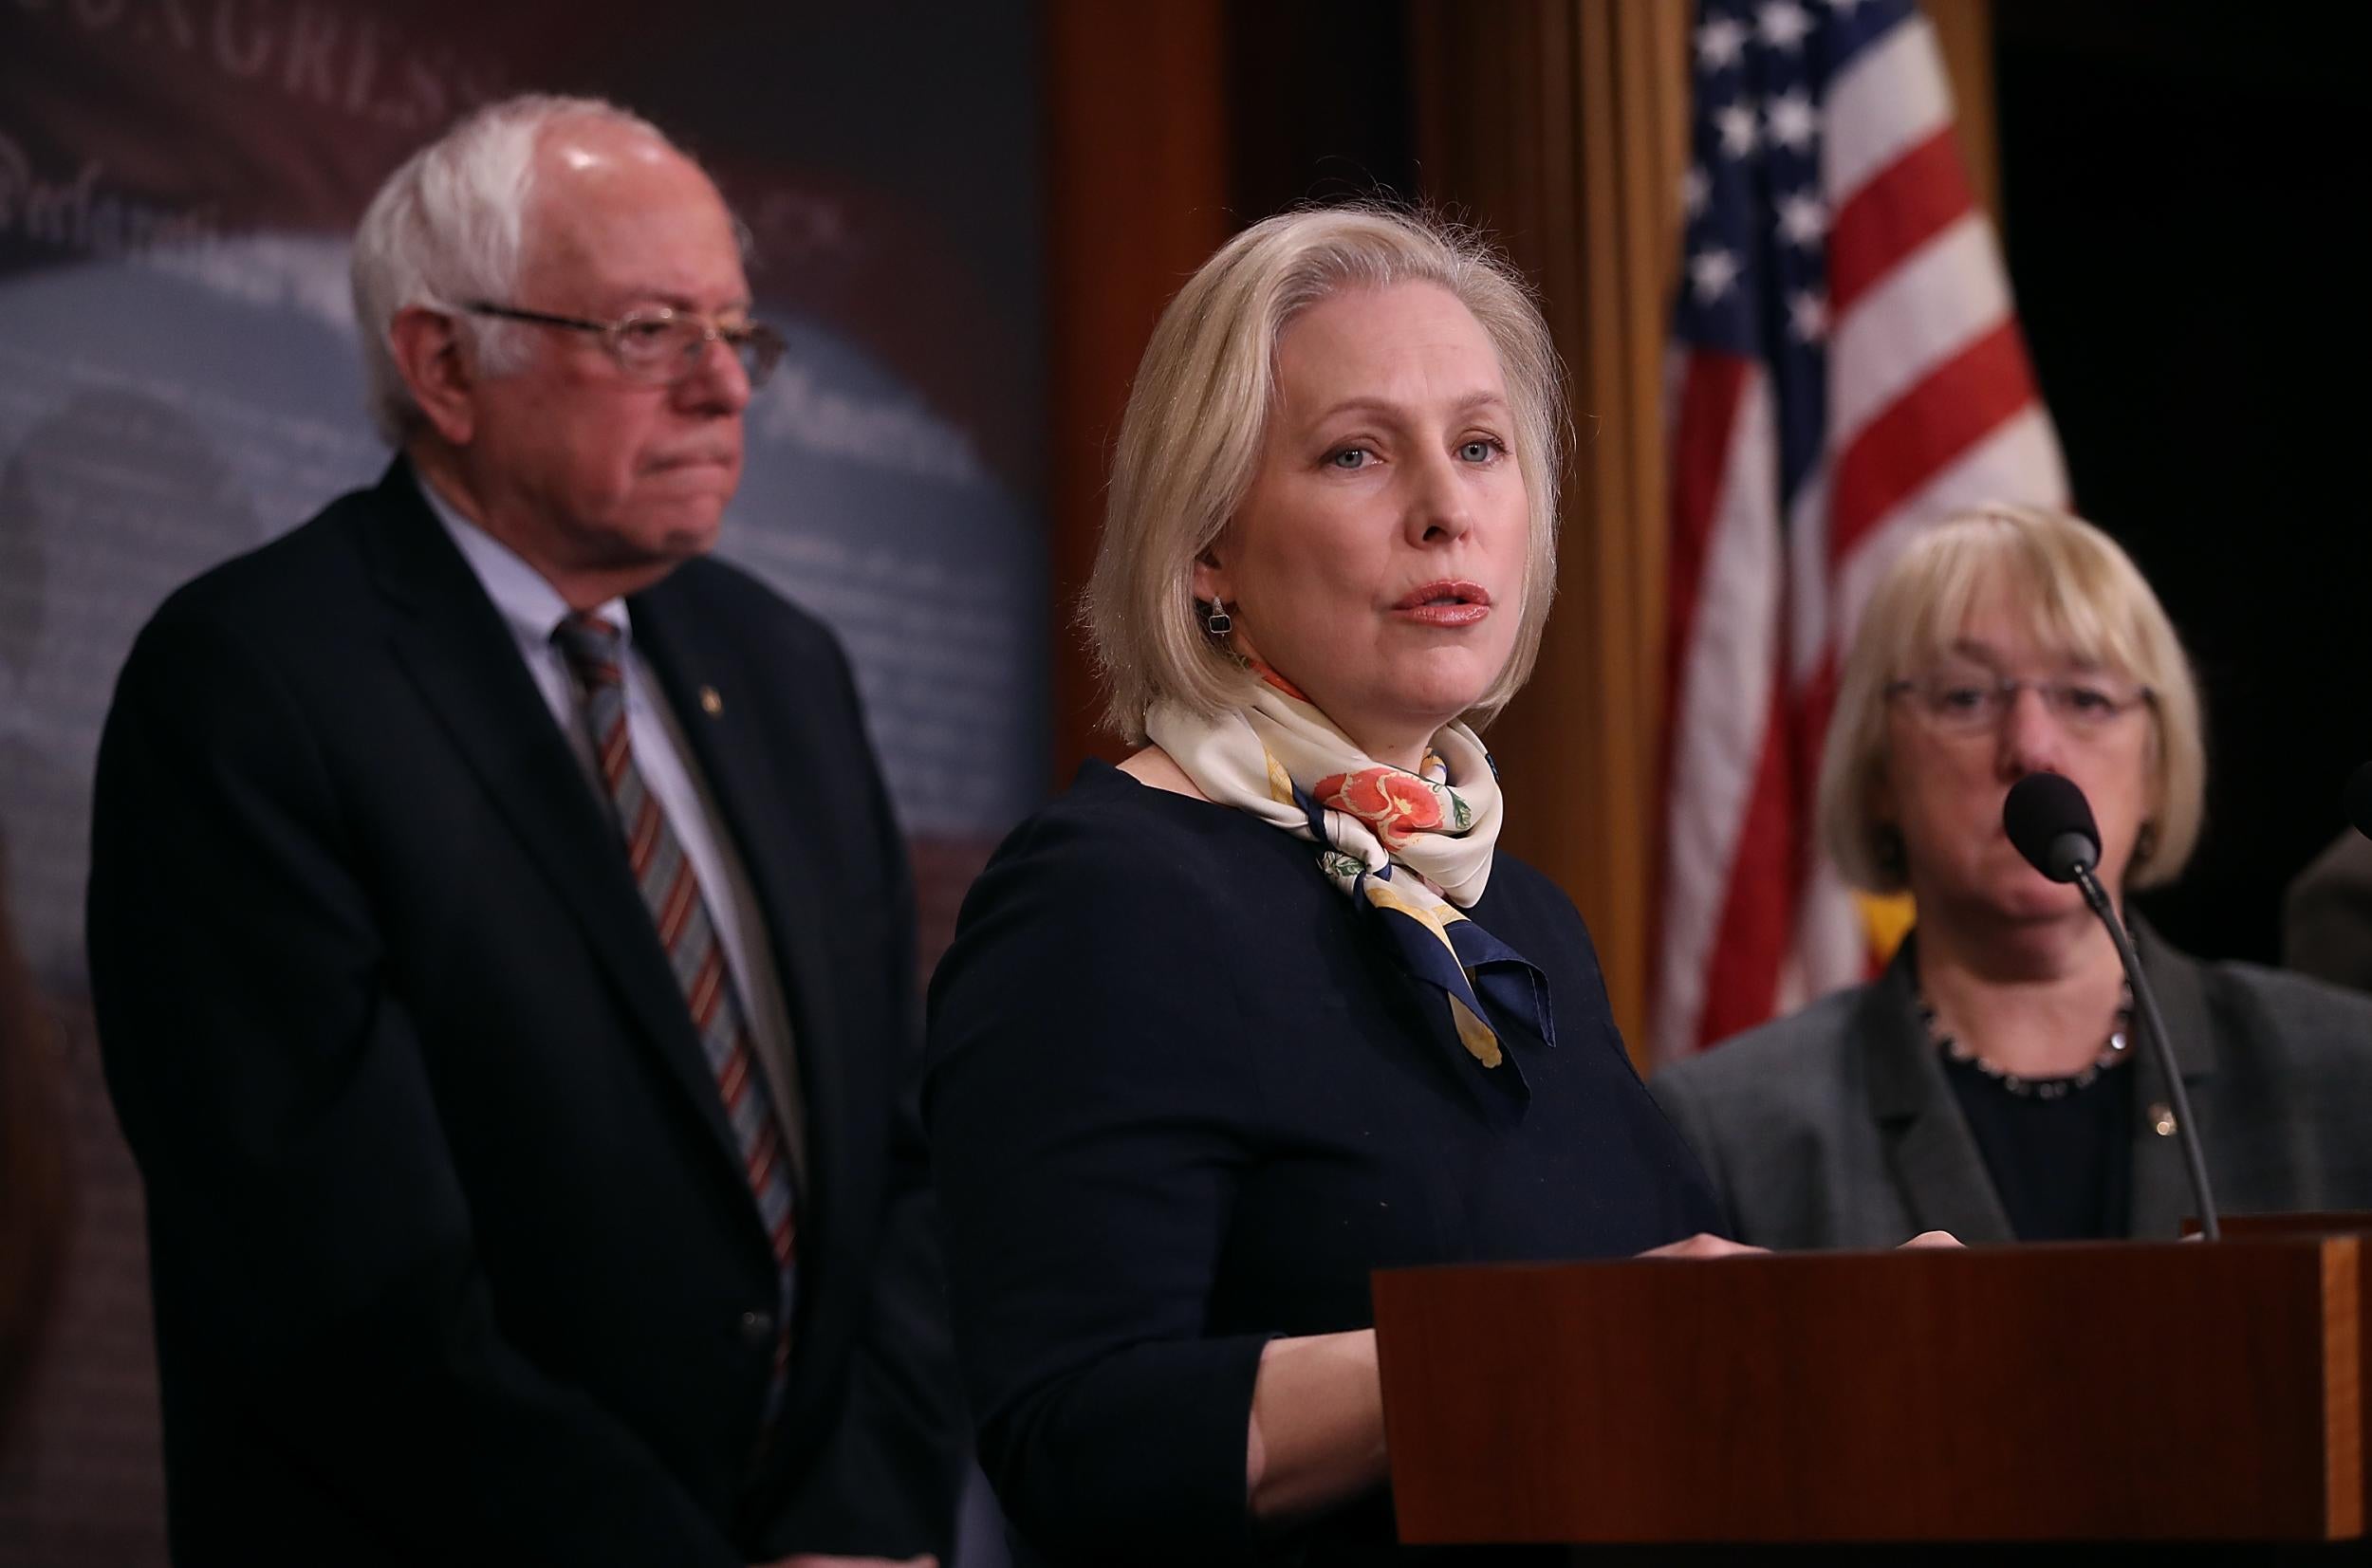 Ms GIllibrand says Mr Clinton should